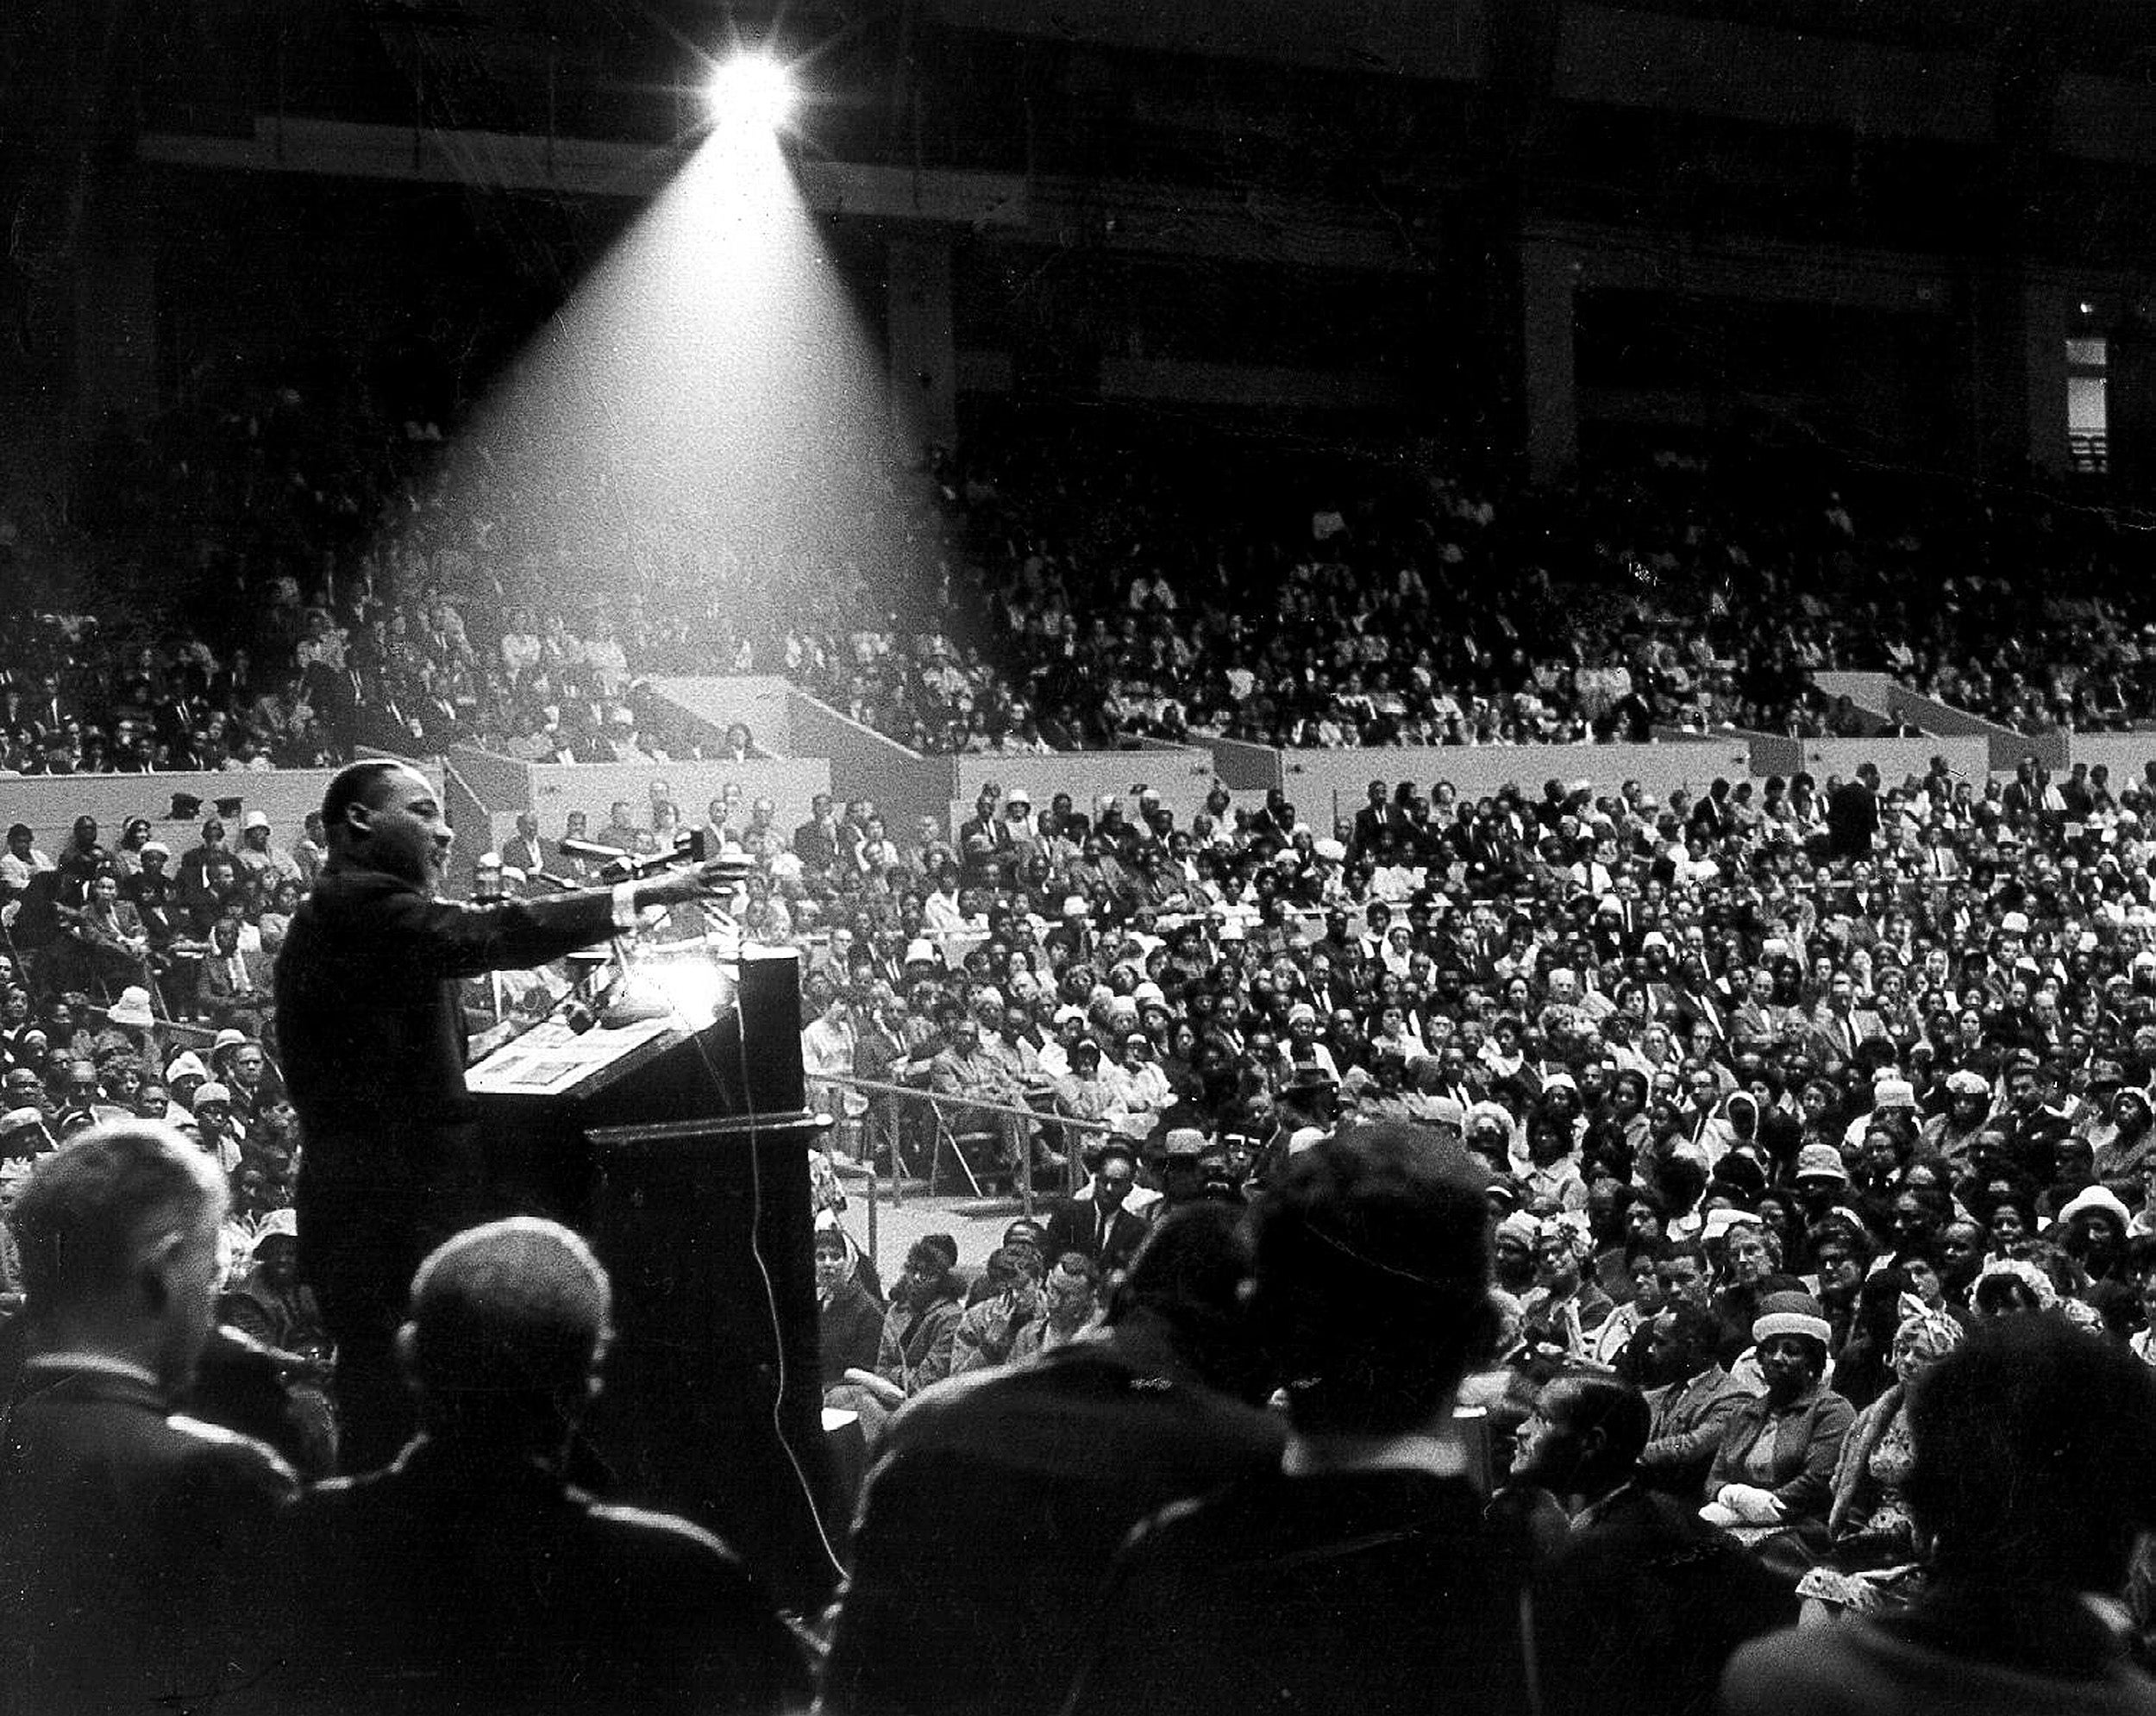 Martin Luther King Jr. at a rally.